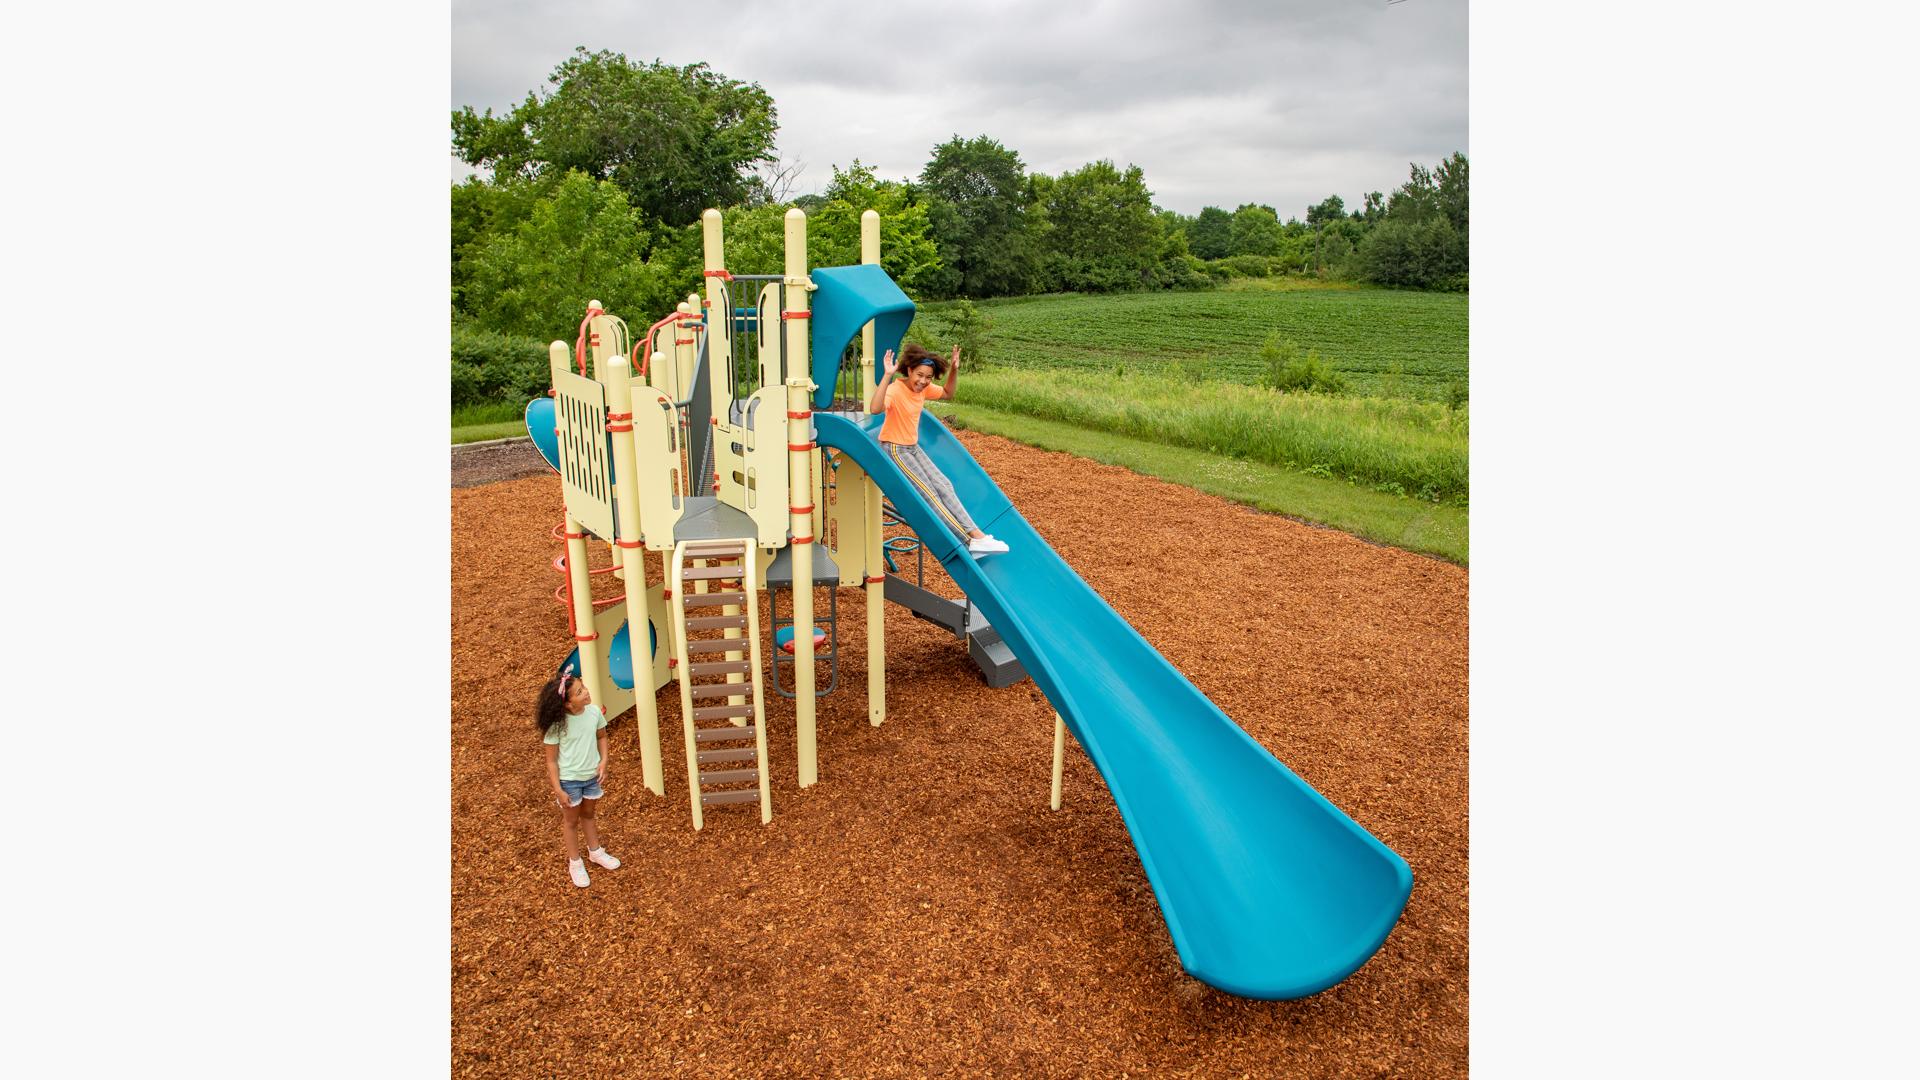 A girl descends a blue Alpine Slide on a yellow PlayBooster playset.